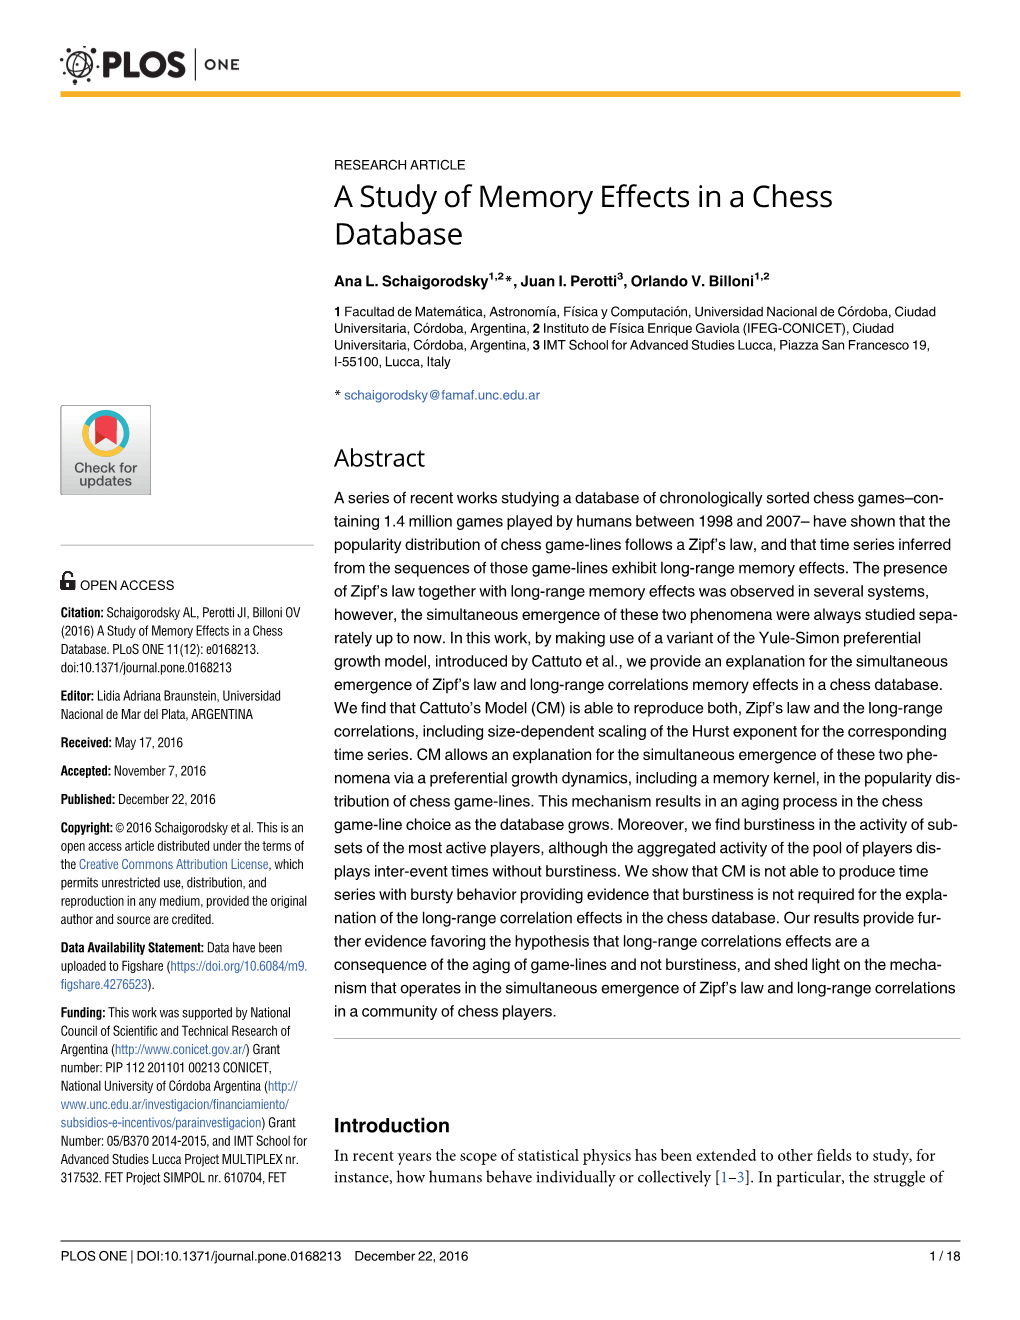 A Study of Memory Effects in a Chess Database